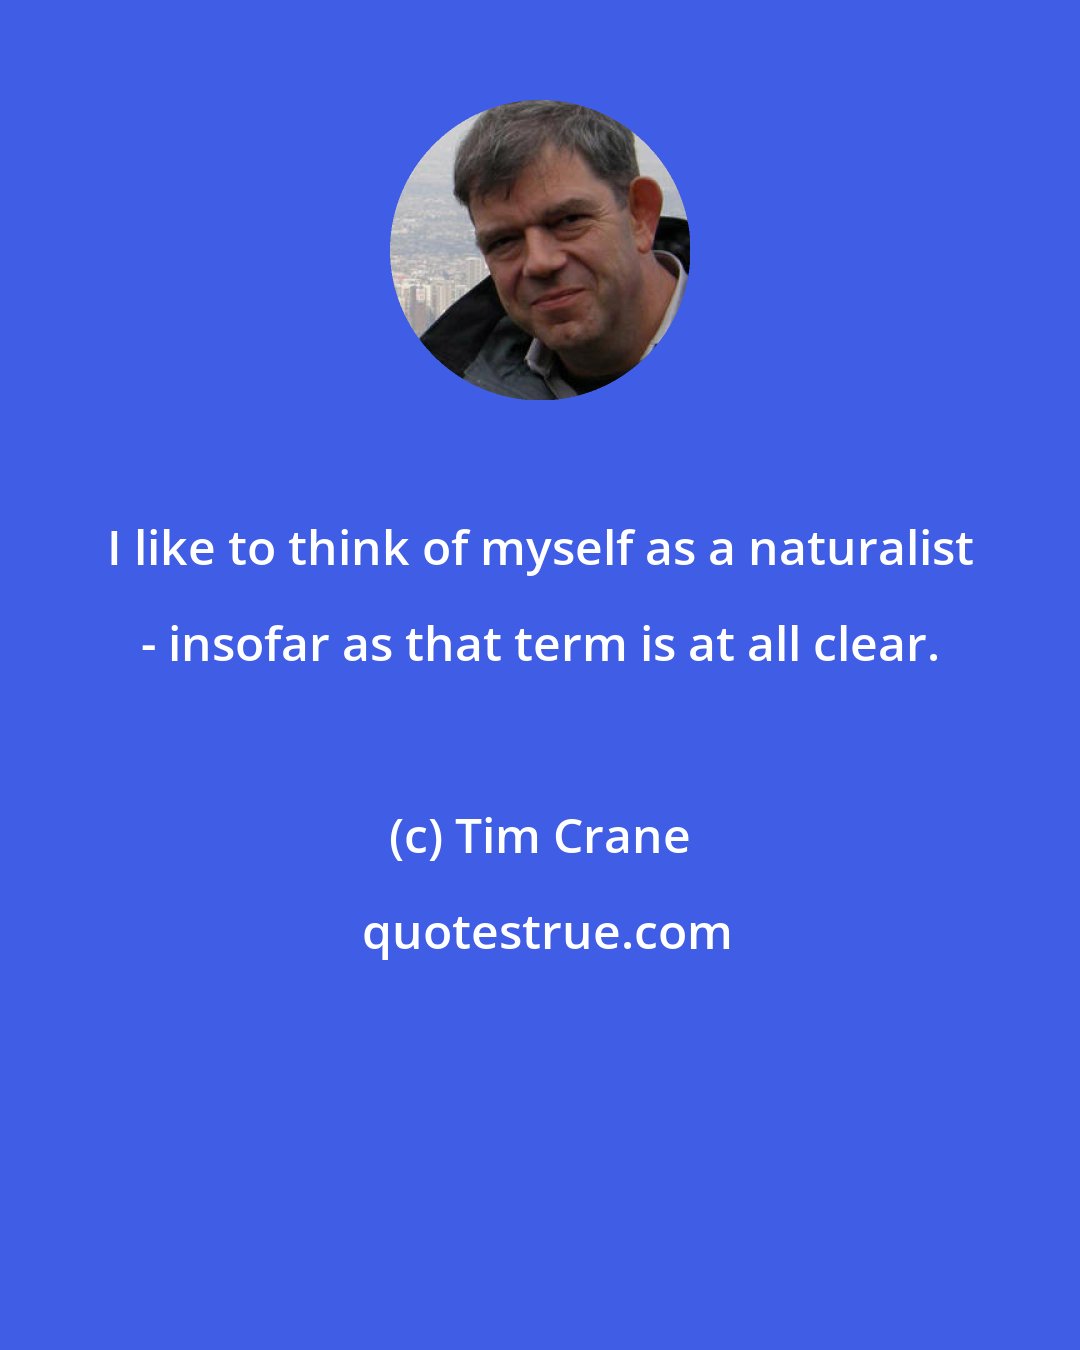 Tim Crane: I like to think of myself as a naturalist - insofar as that term is at all clear.